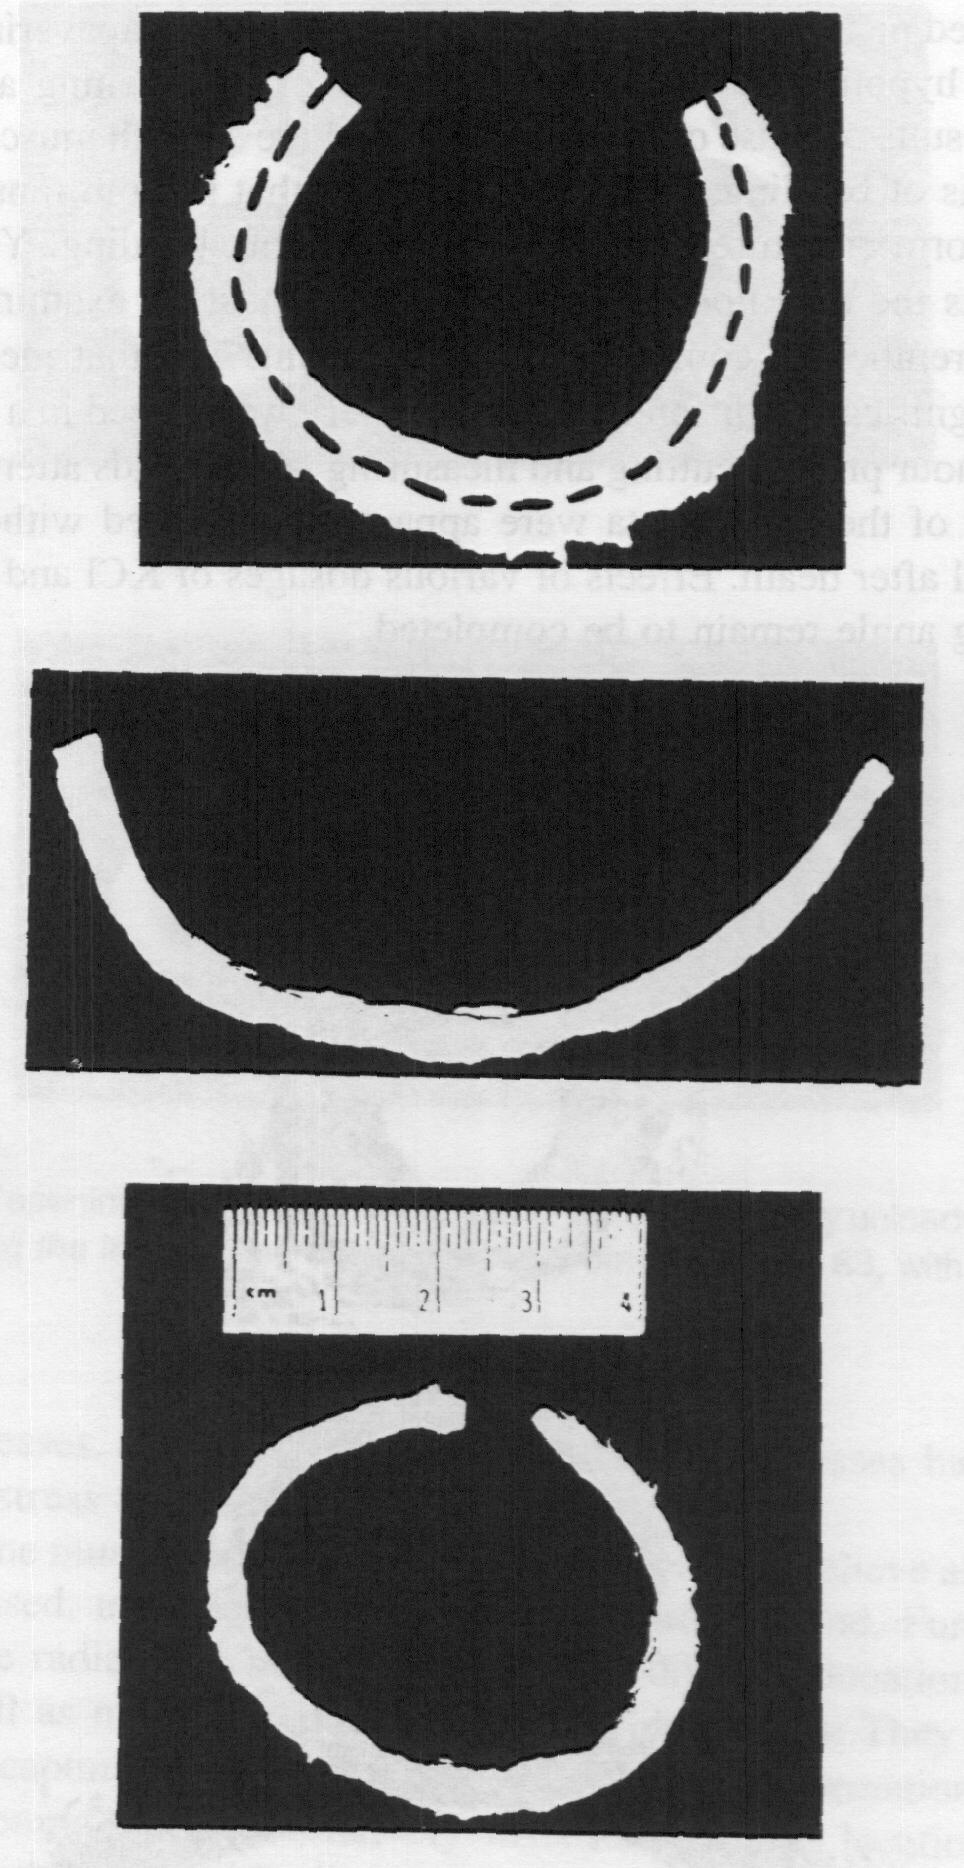 Residual Strain The opening-up (right) of originally unloaded intact arterial ring (left) following a radial cut (from Fung, 1984) Opening Angles A B C Adventitia is the origin of the